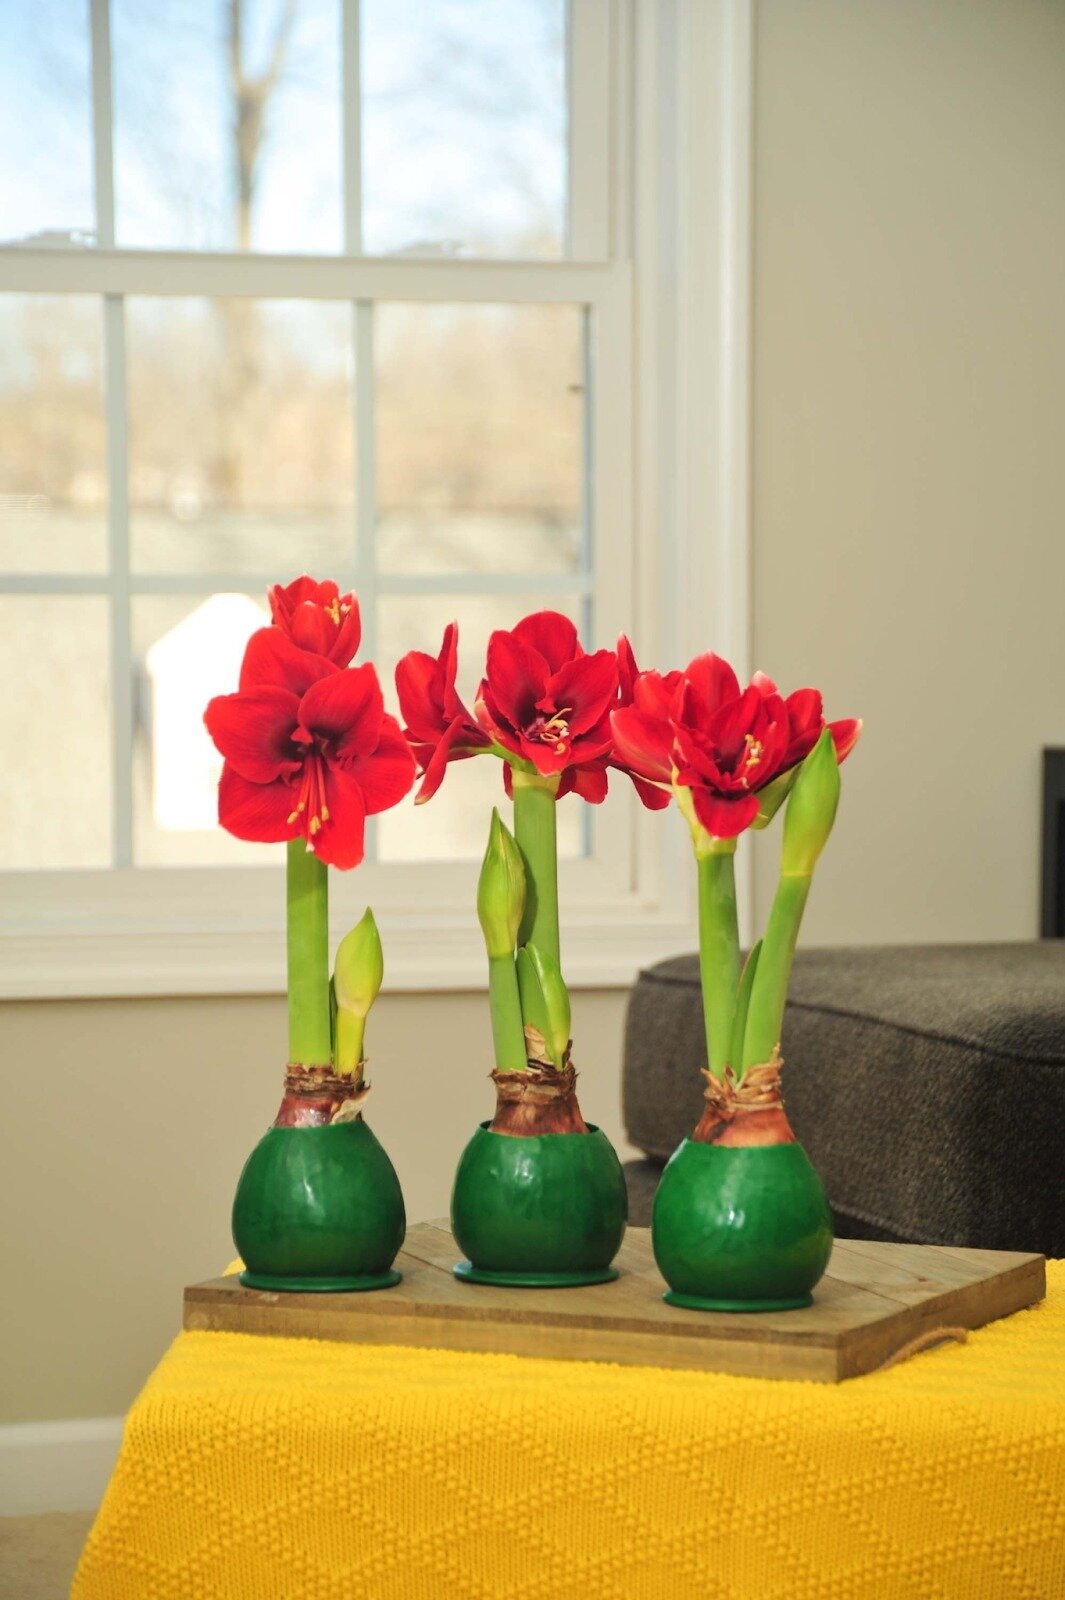 Today is the last day of the season to order! Come shop our sitewide sale for 30% off all Waxed, Specialty, and Raw bulb Amaryllis while supplies last! https://shop.bloomaker.com/storefront.aspx 

#Sale #Amaryllis #Spring #Flowers #SpringFlowers #Flo